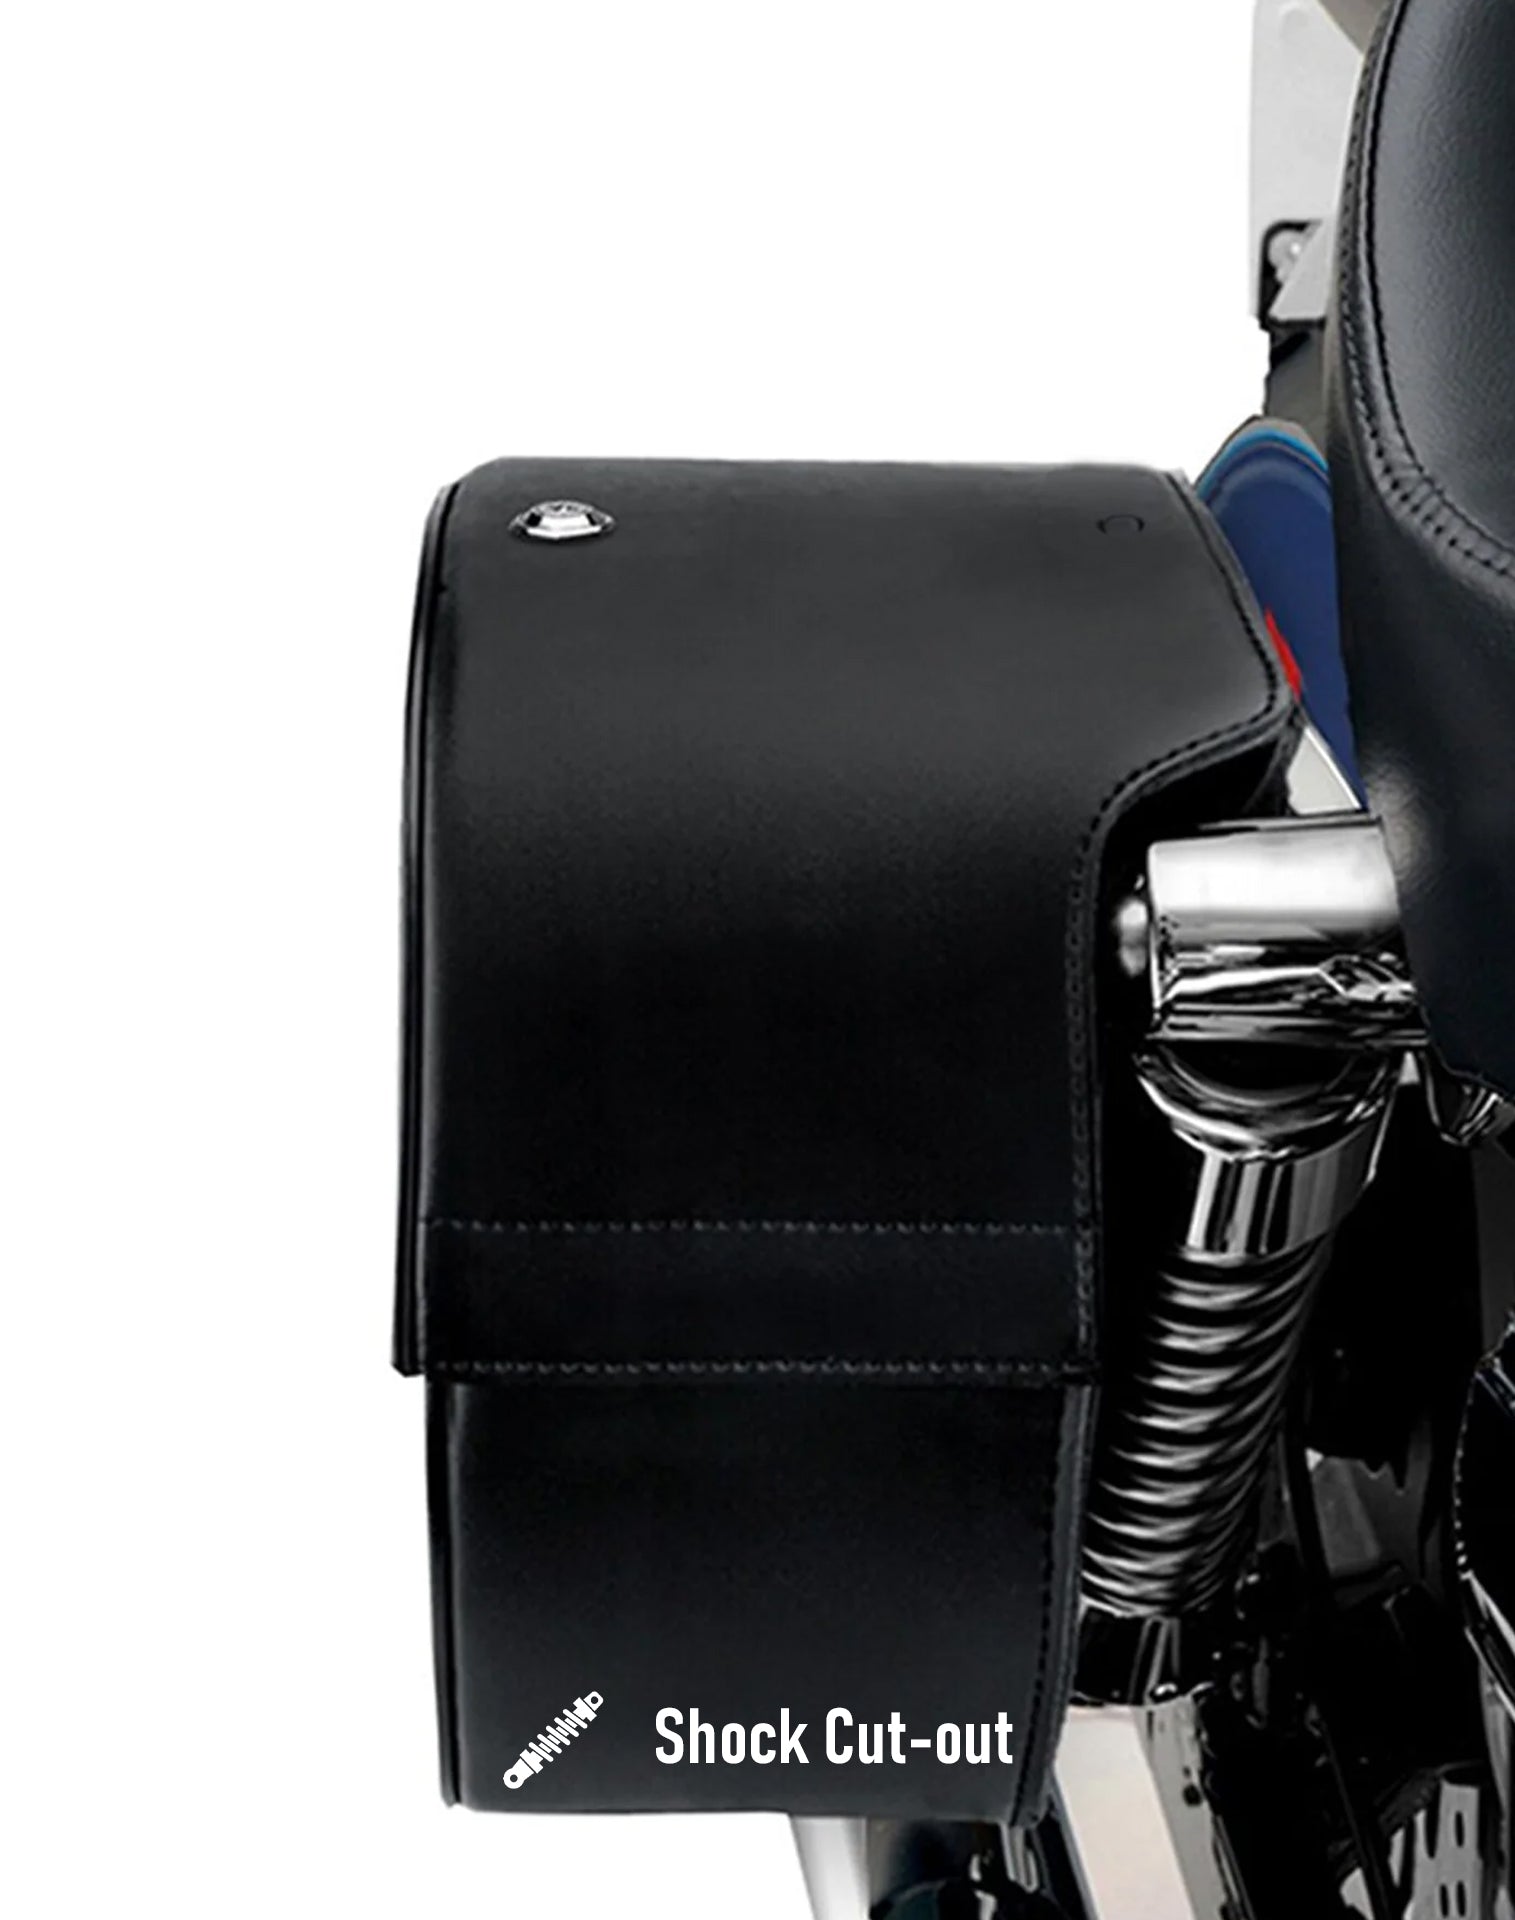 Viking Skarner Large Shock Cut Out Leather Motorcycle Saddlebags For Harley Sportster 1200 Super Low Xl1200T Hard Shell Construction